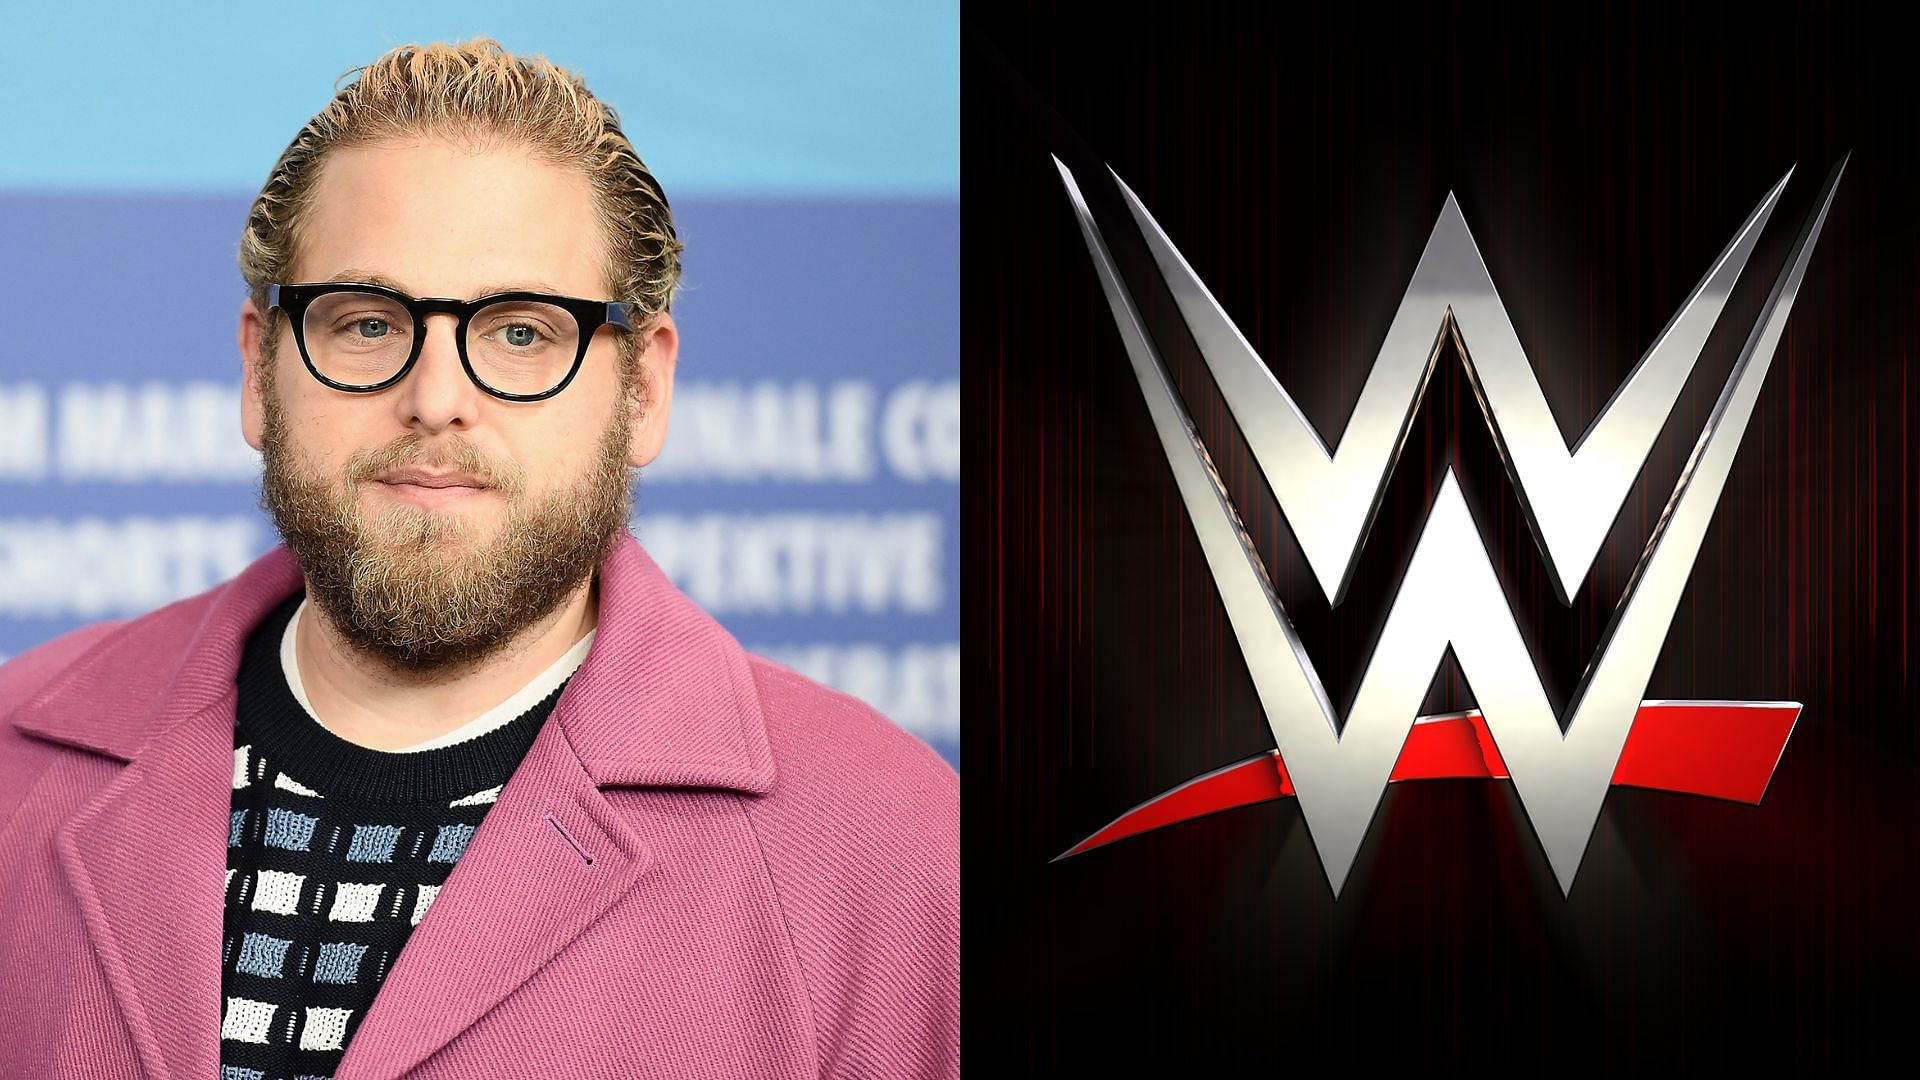 Why was Jonah Hill omitted as a guest host from Monday Night RAW in 2011? Insights into backstage sentiment